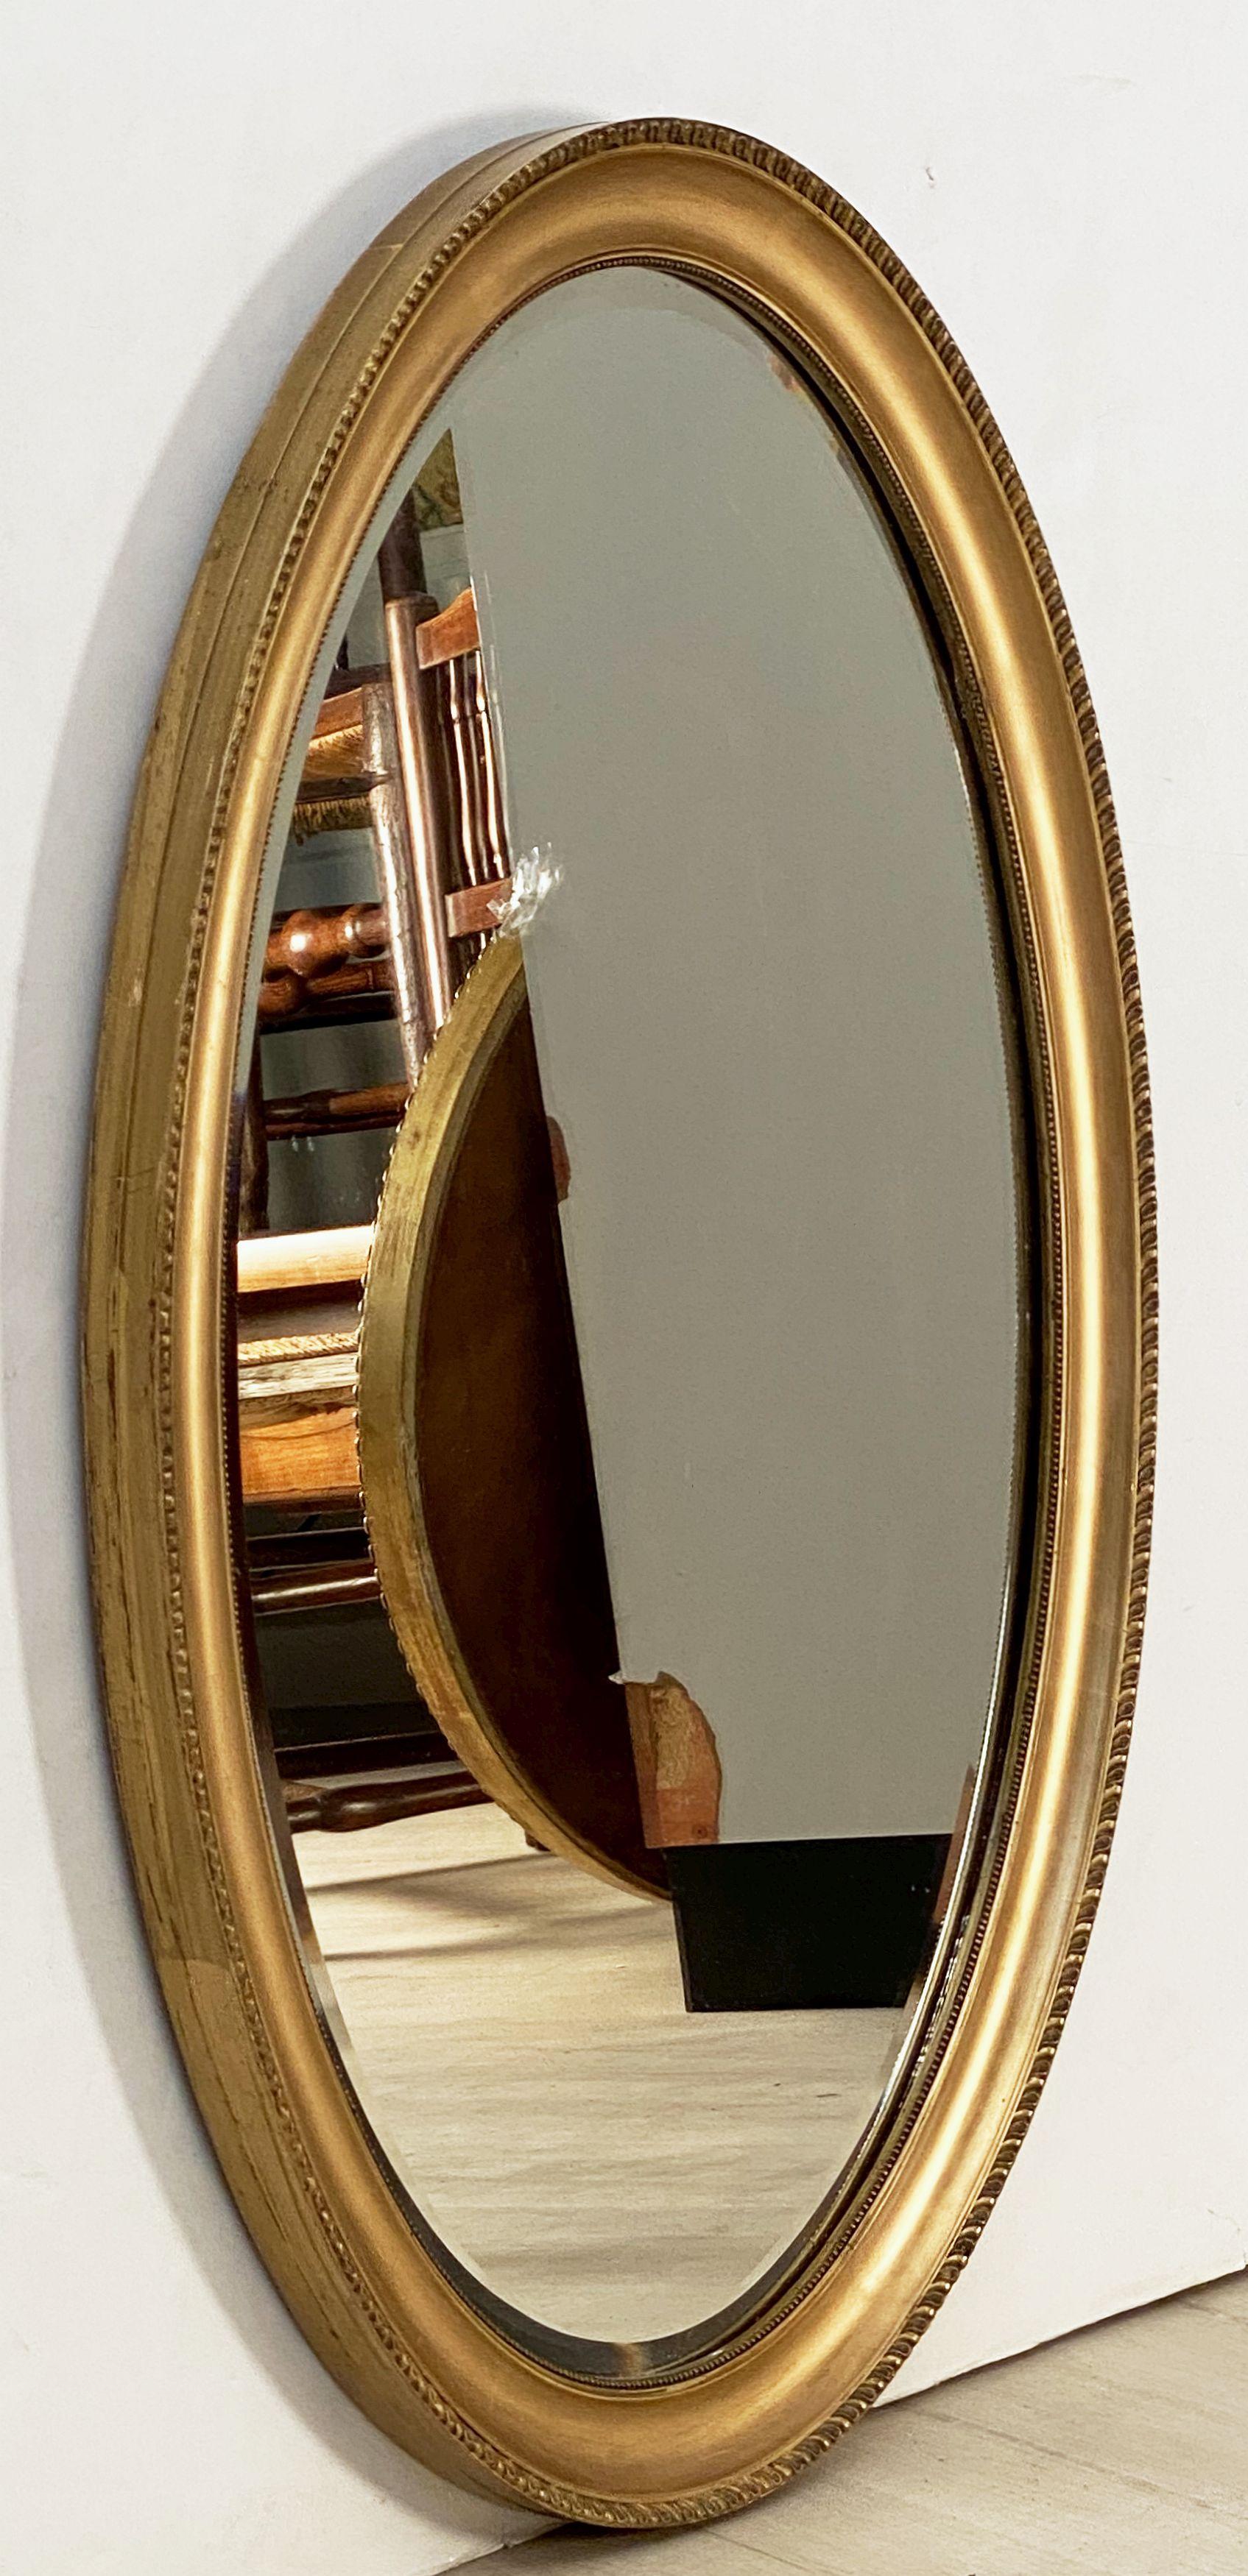 A fine English oval mirror featuring a gilt frame with a decorative gadroon edge surrounding the beveled mirror plate.

Dimensions are H 33 1/2 inches x W 23 3/4 inches.